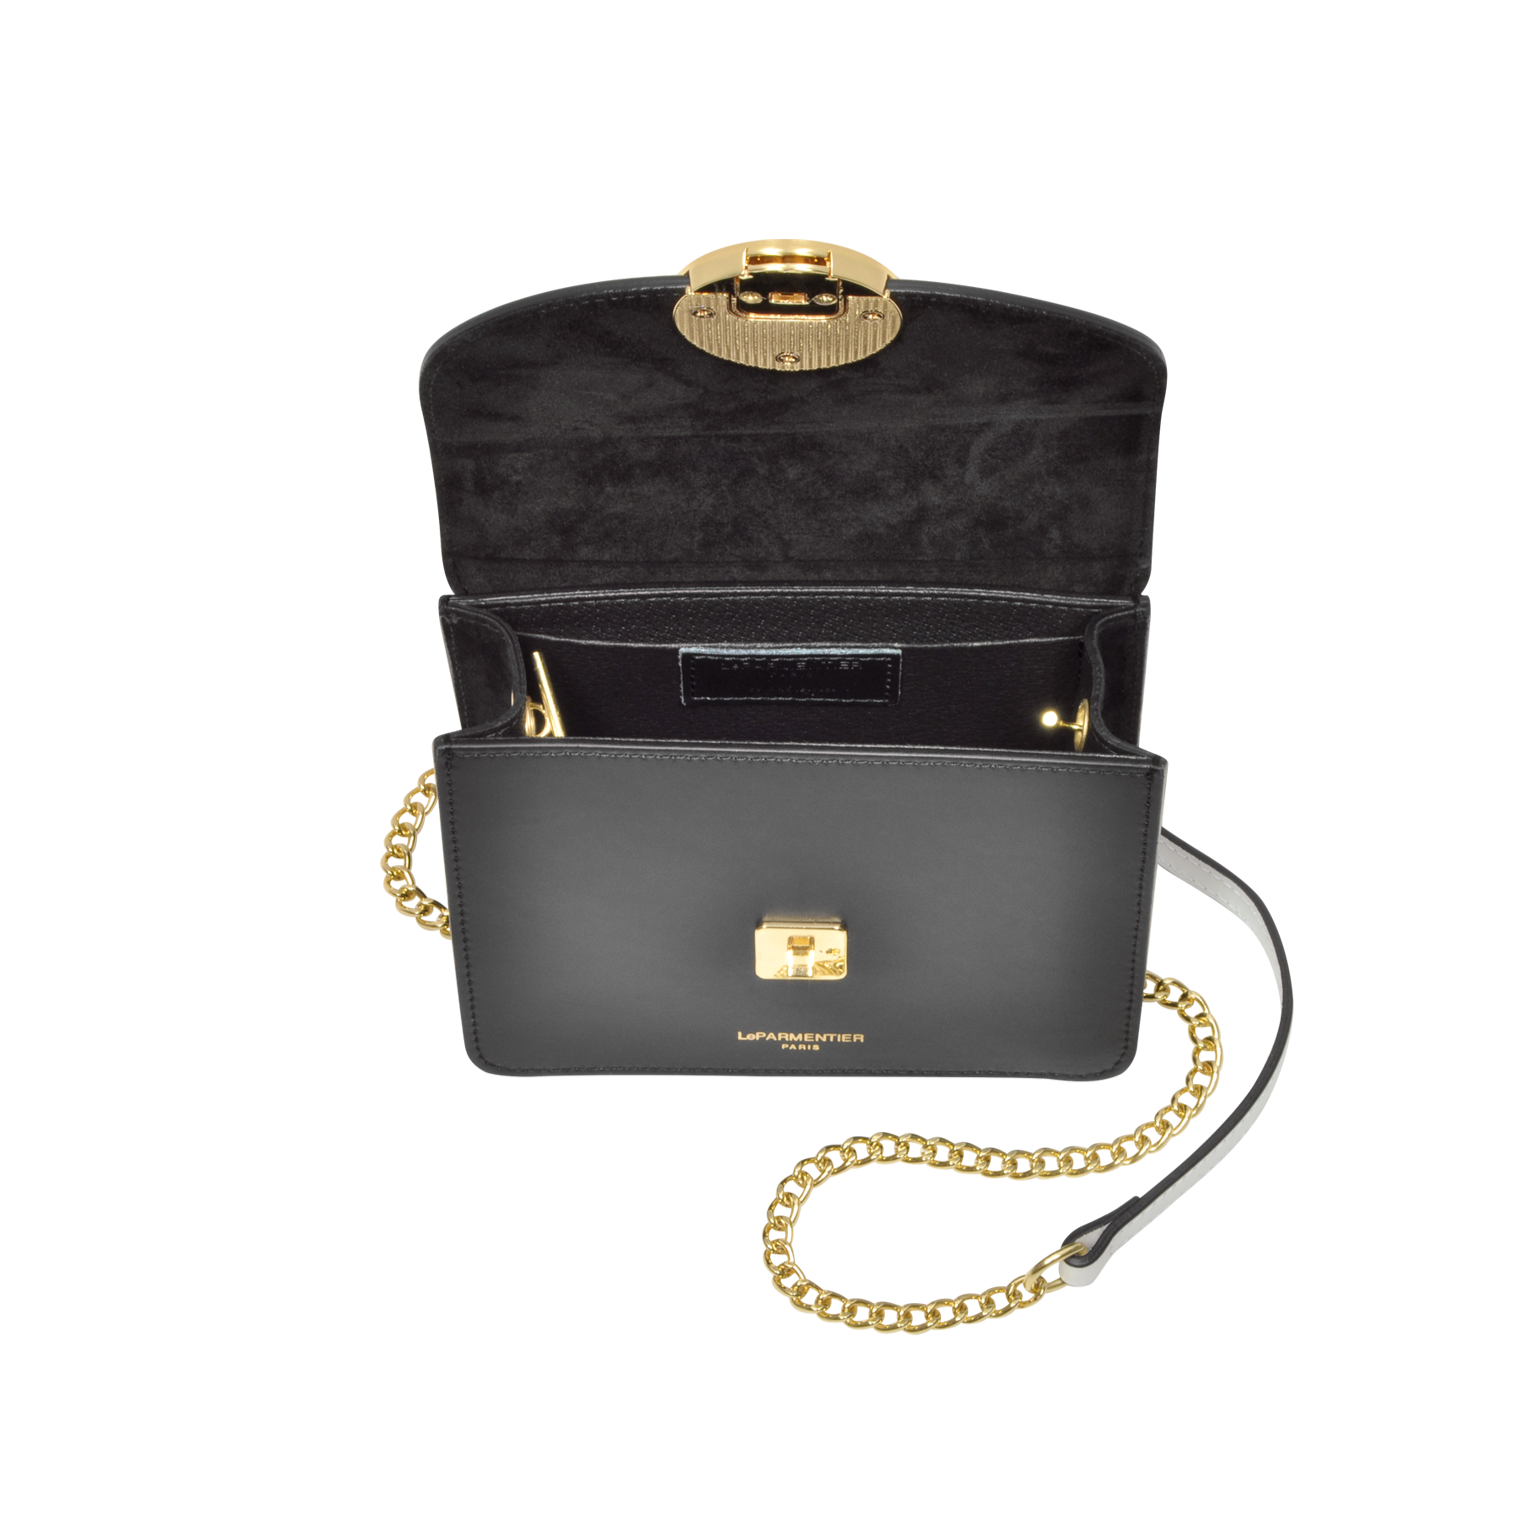 The sleek and sophisticated New Ondina Mini Colour Block Shoulder and Crossbody Bag from Le Parmentier at Mazzi D Fiori, made of authentic Italian leather, offers a stylish solution for carrying your essentials day or night.  Its compact yet chic design features a circular push lock closure, a chain and leather shoulder strap, and tonal stitching, all complemented by elegant gold tone hardware.